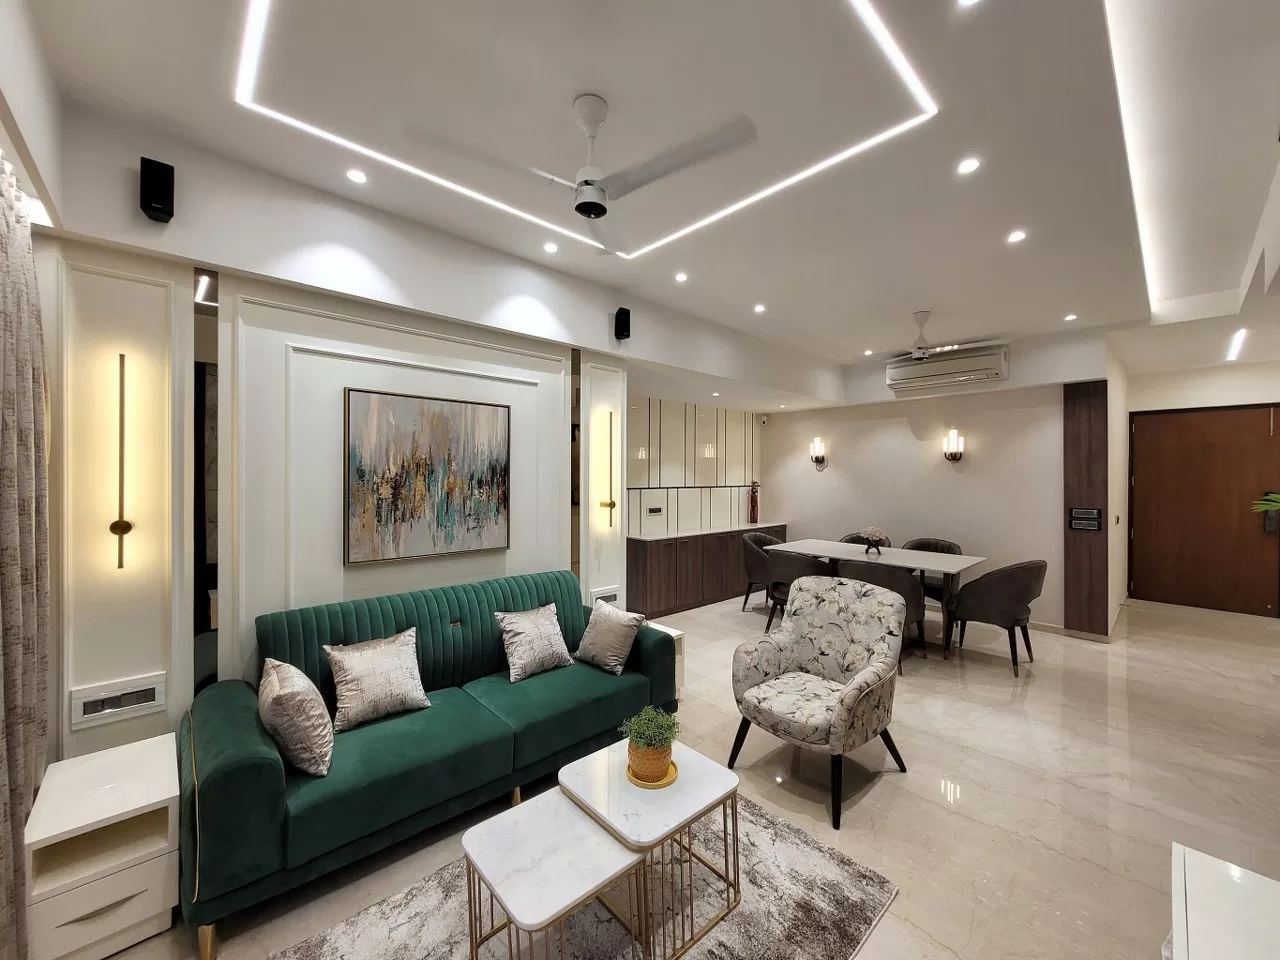 An Empirical Residence With Timeless And Classy Design | Sonu Mistry Design